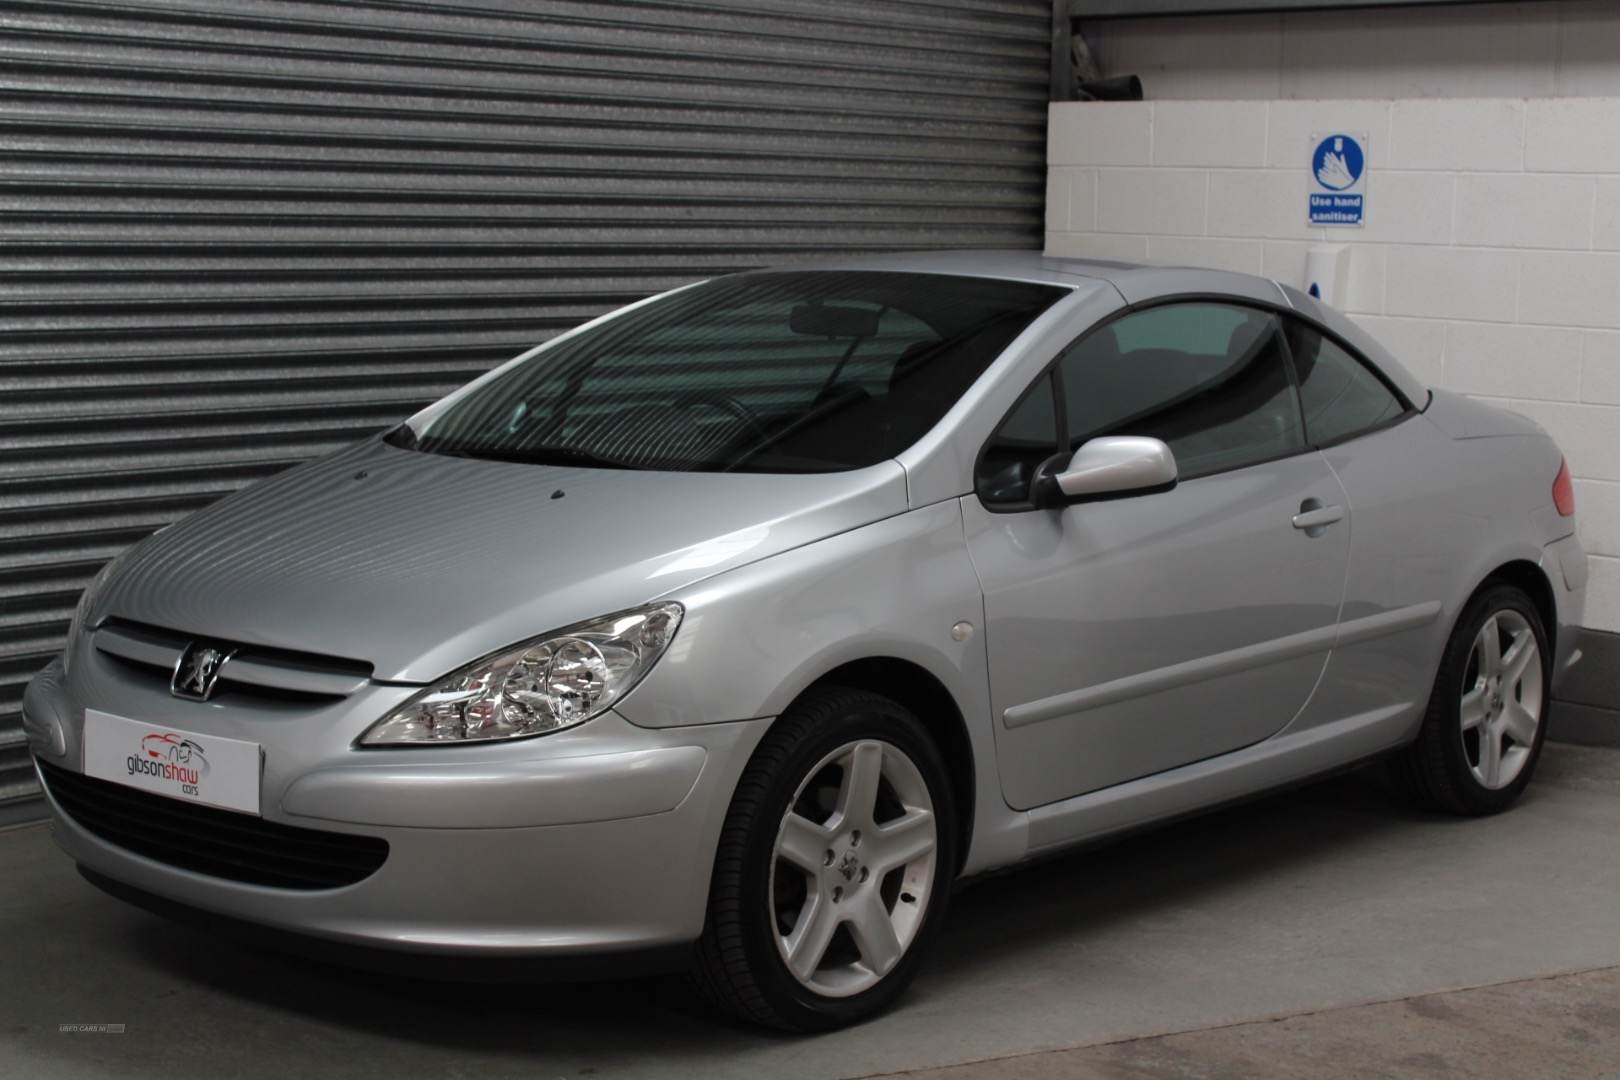 Peugeot 307 SW (2002 - 2008) used car review, Car review